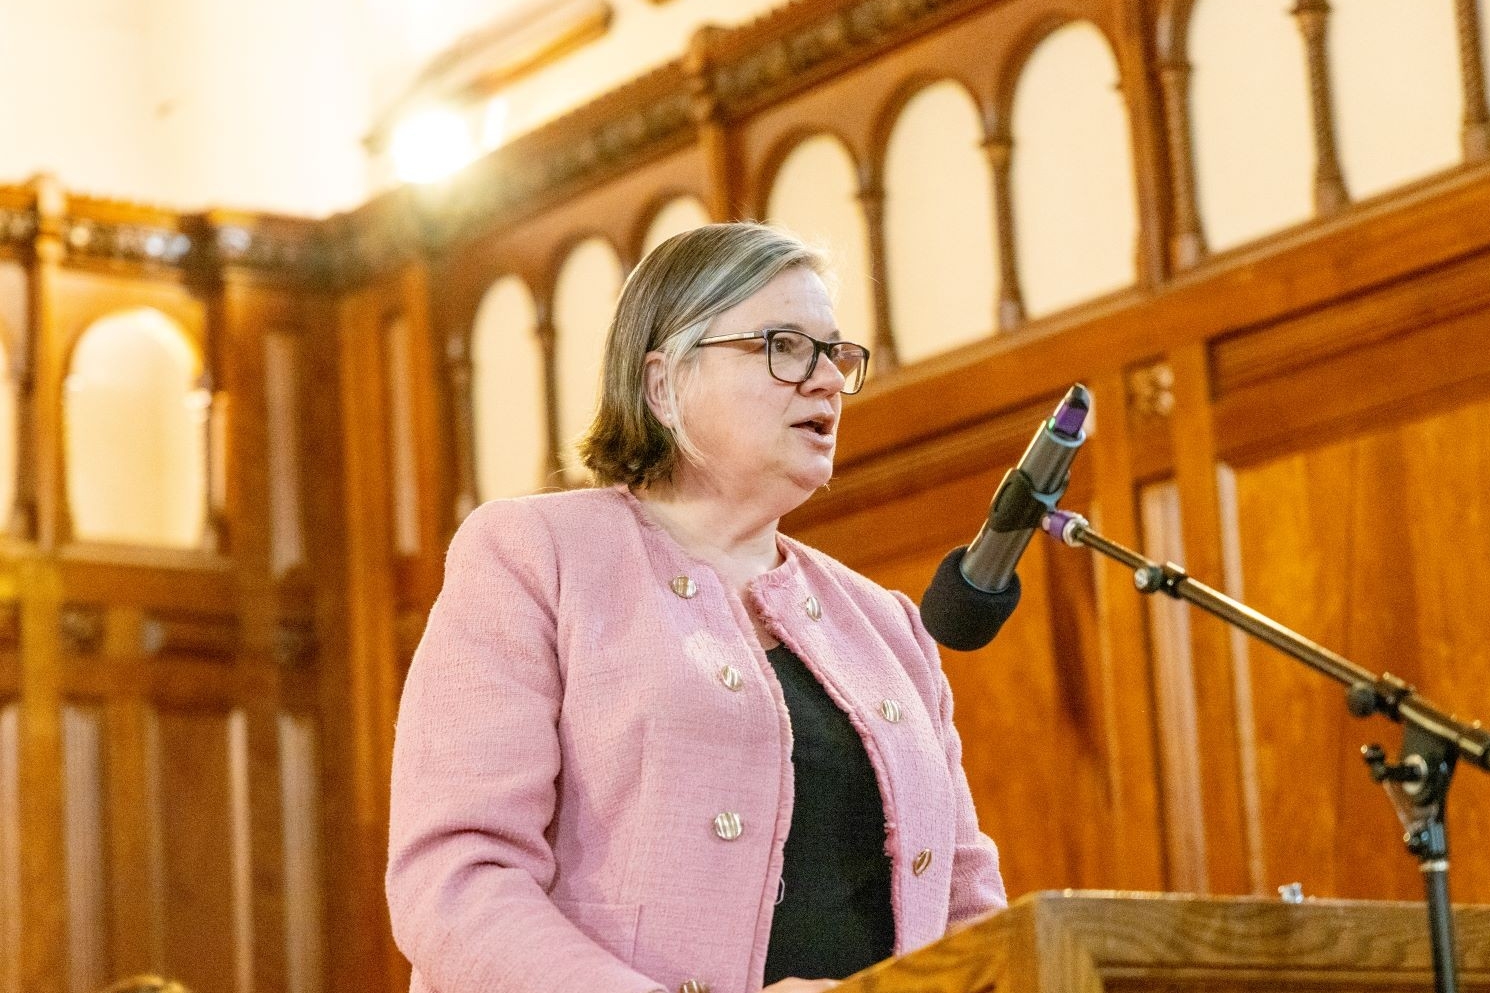 Dean Pascale Sicotte at the podium in the Loyola Chapel